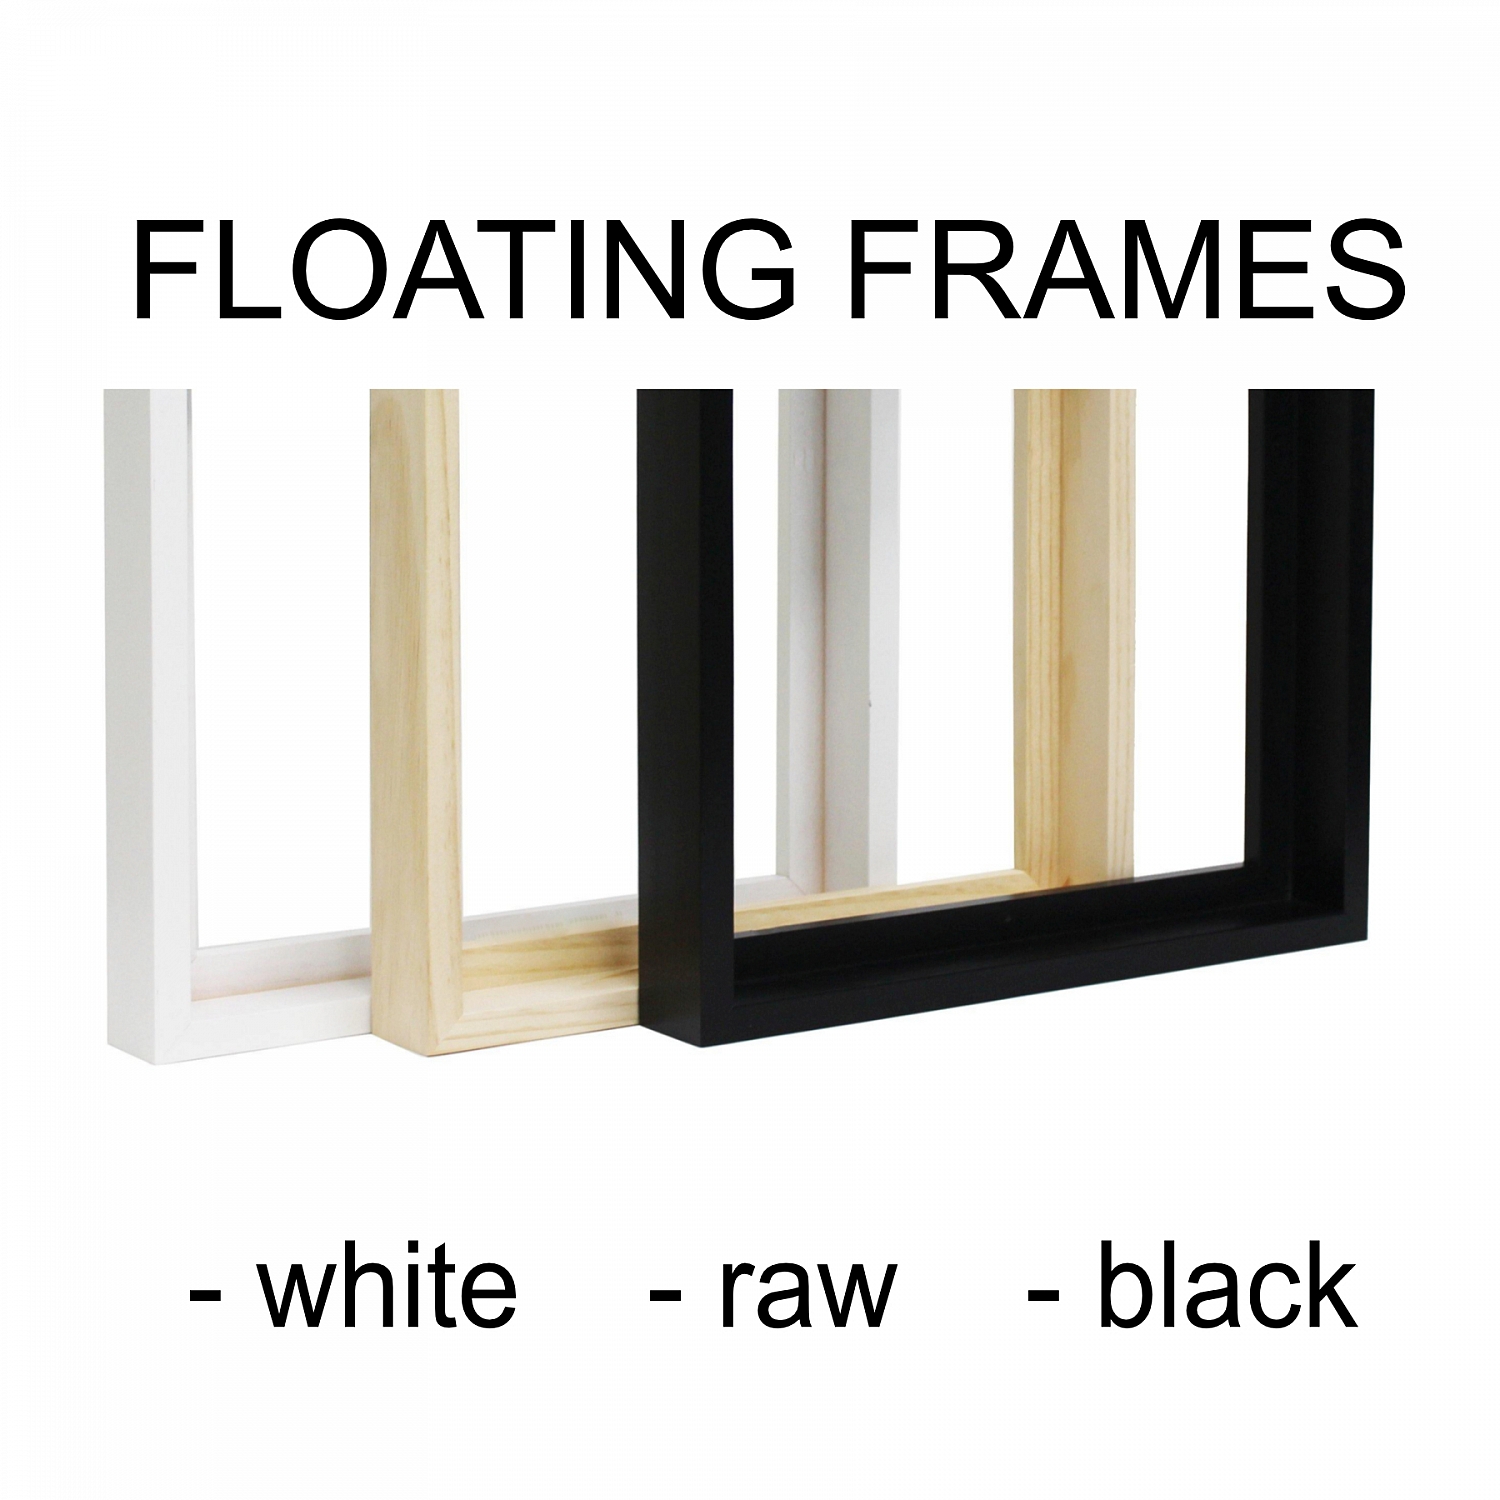 FLOATING FRAME (SHADOW BOX) - SQUARE CANVAS PRINT YOUR OWN CUSTOM IMAGE | Floating_frames.jpg